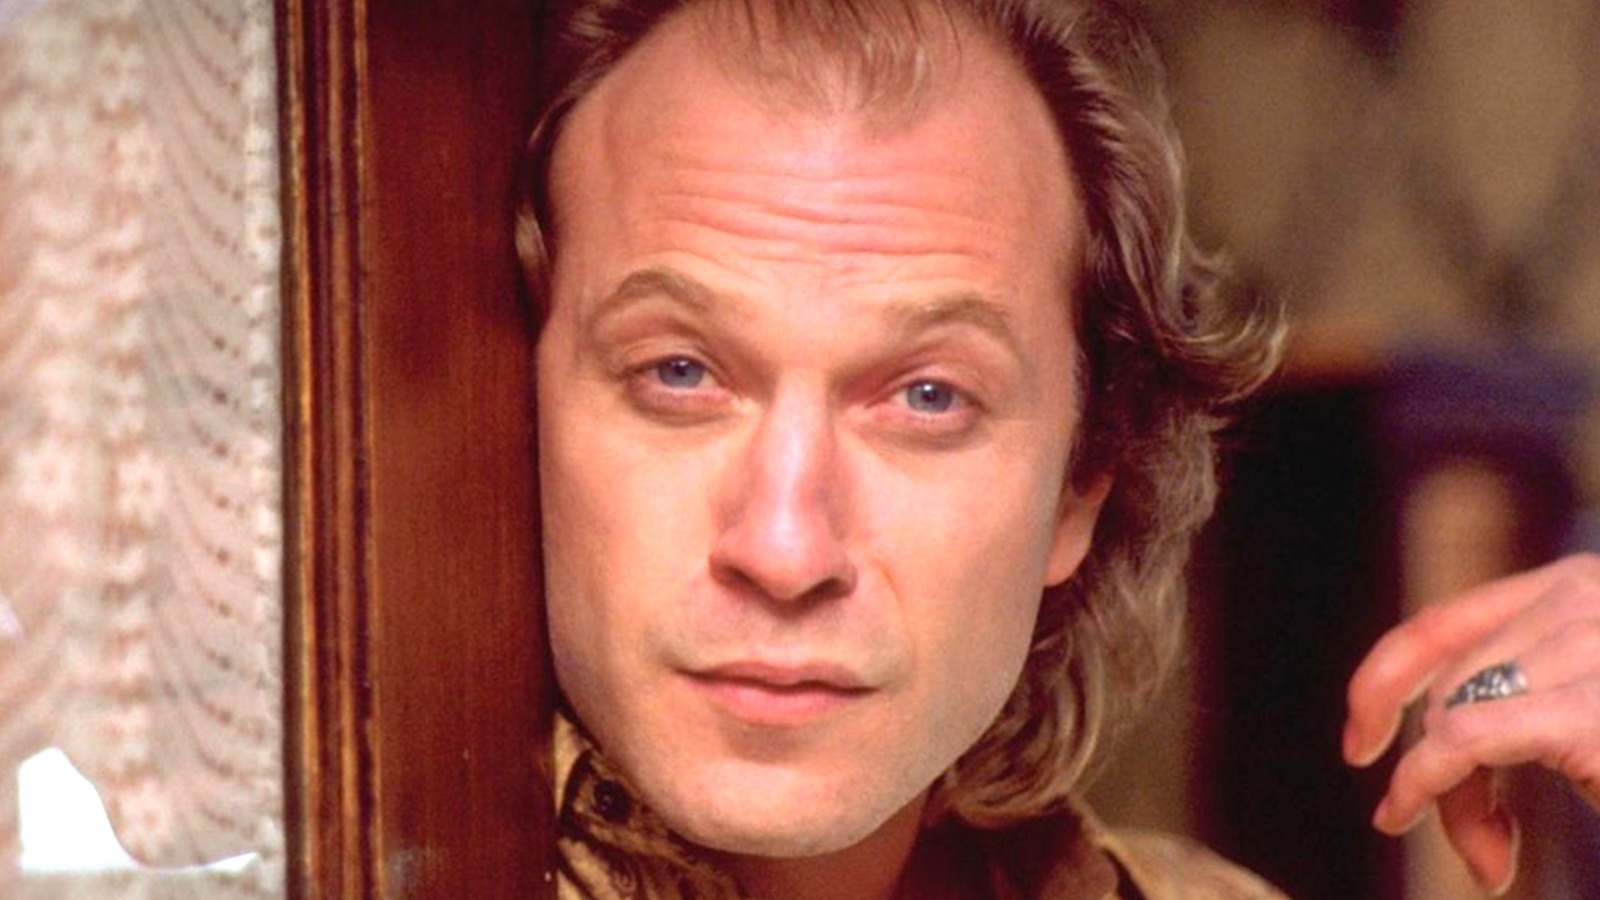 "The Silence of the Lambs" includes an iconic Buffalo Bill scene ...